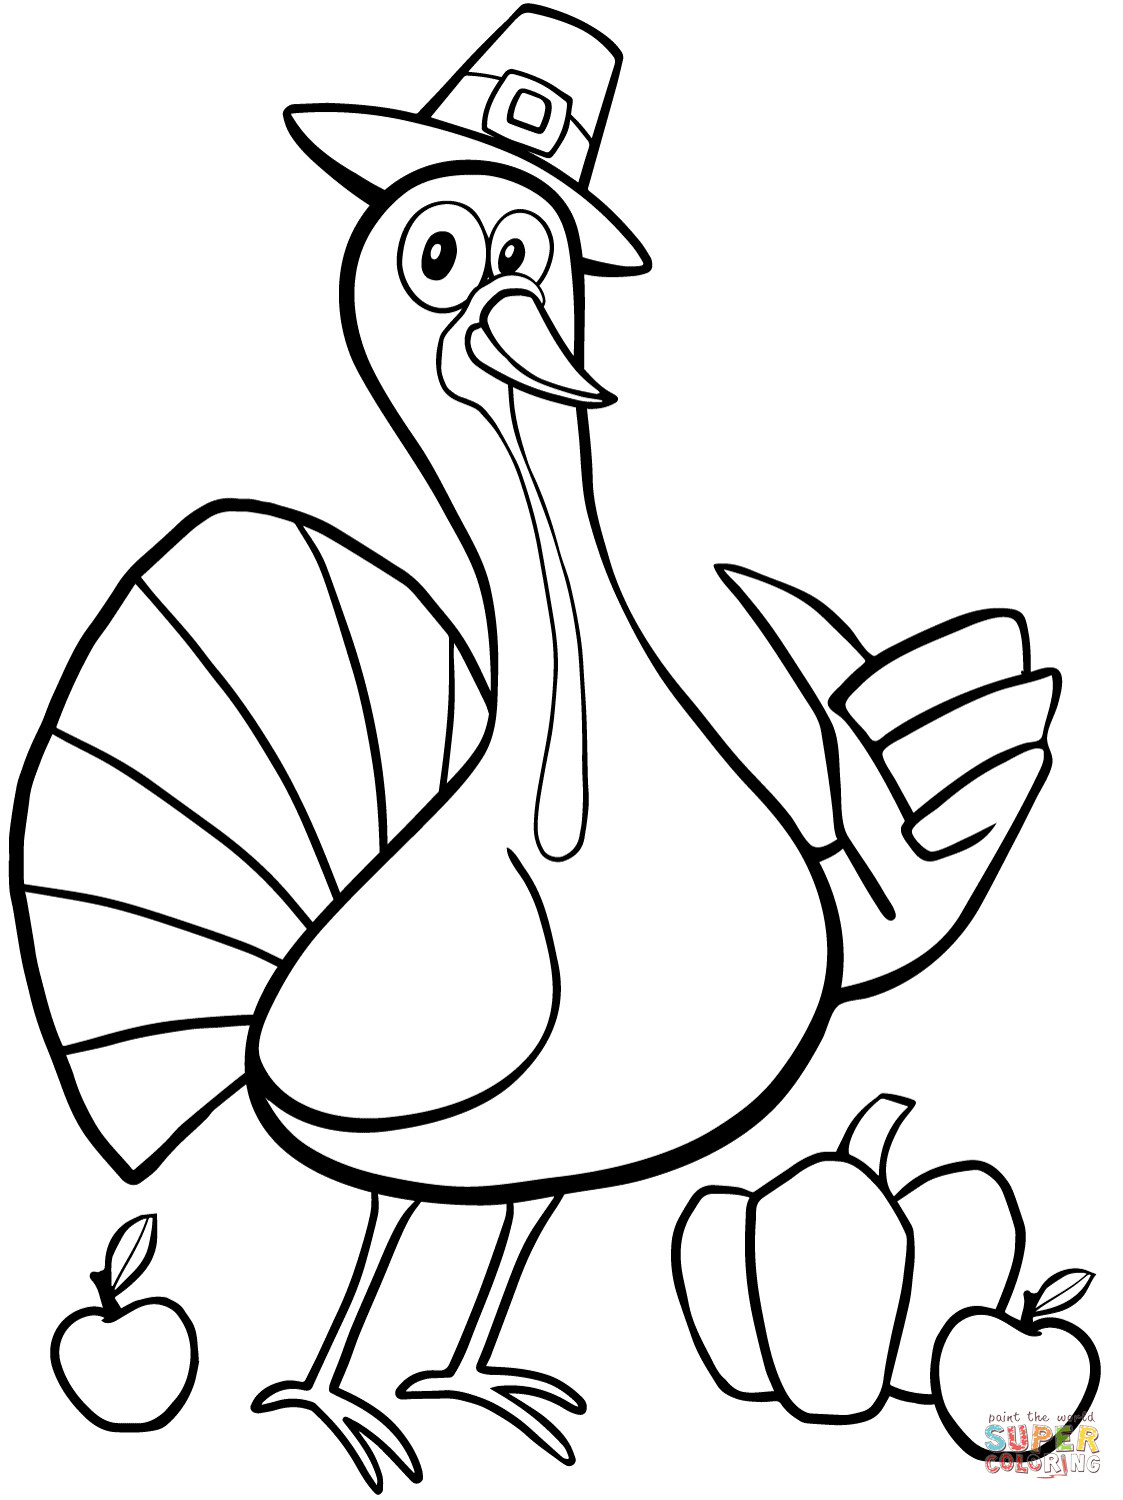 Turkey Coloring Pages Printable
 Cool Thanksgiving Turkey coloring page